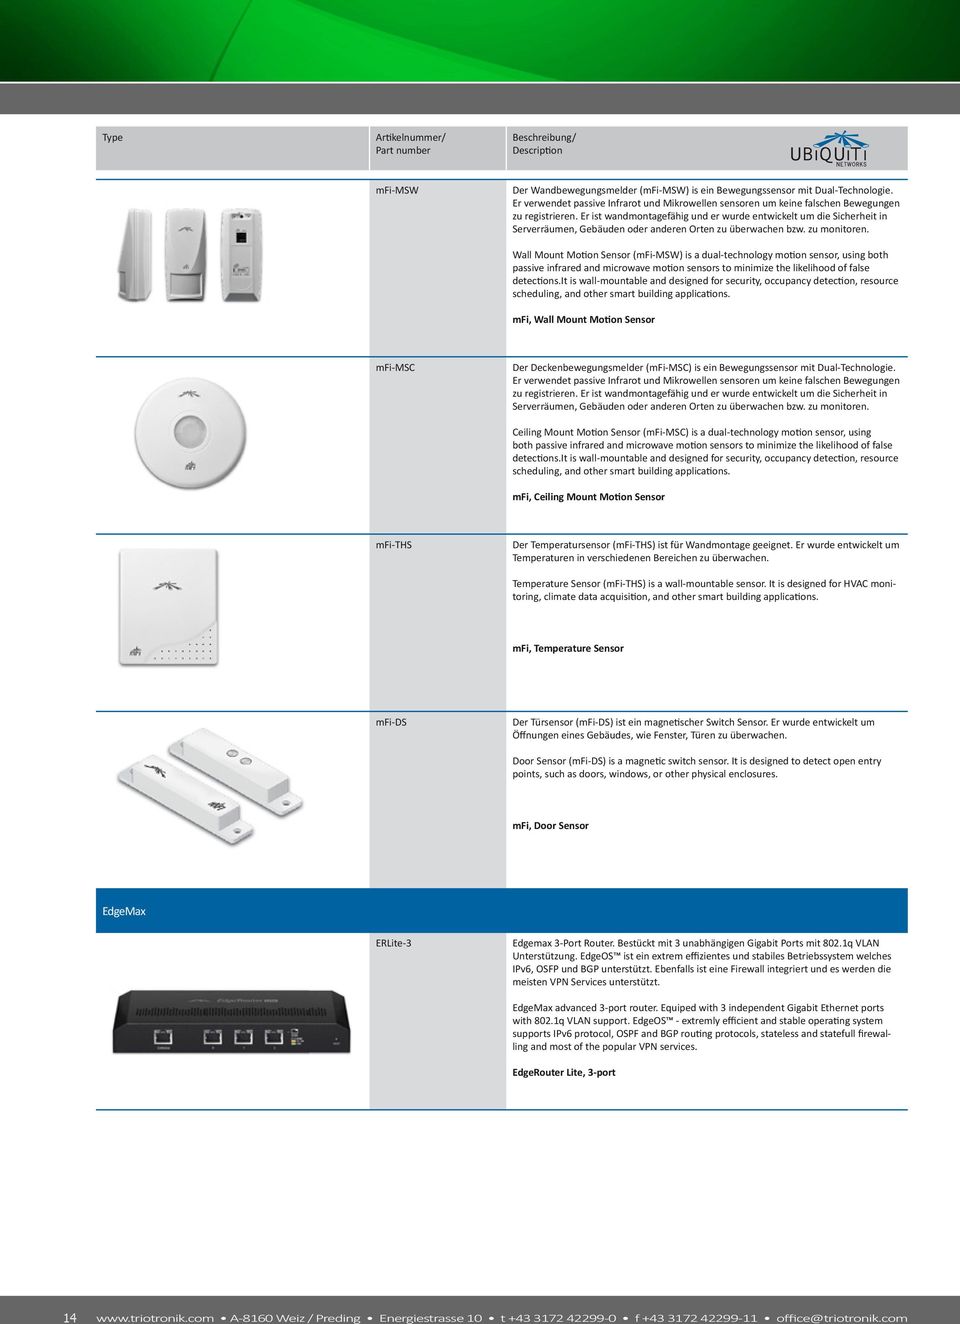 Wall Mount Motion Sensor (mfi-msw) is a dual-technology motion sensor, using both passive infrared and microwave motion sensors to minimize the likelihood of false detections.